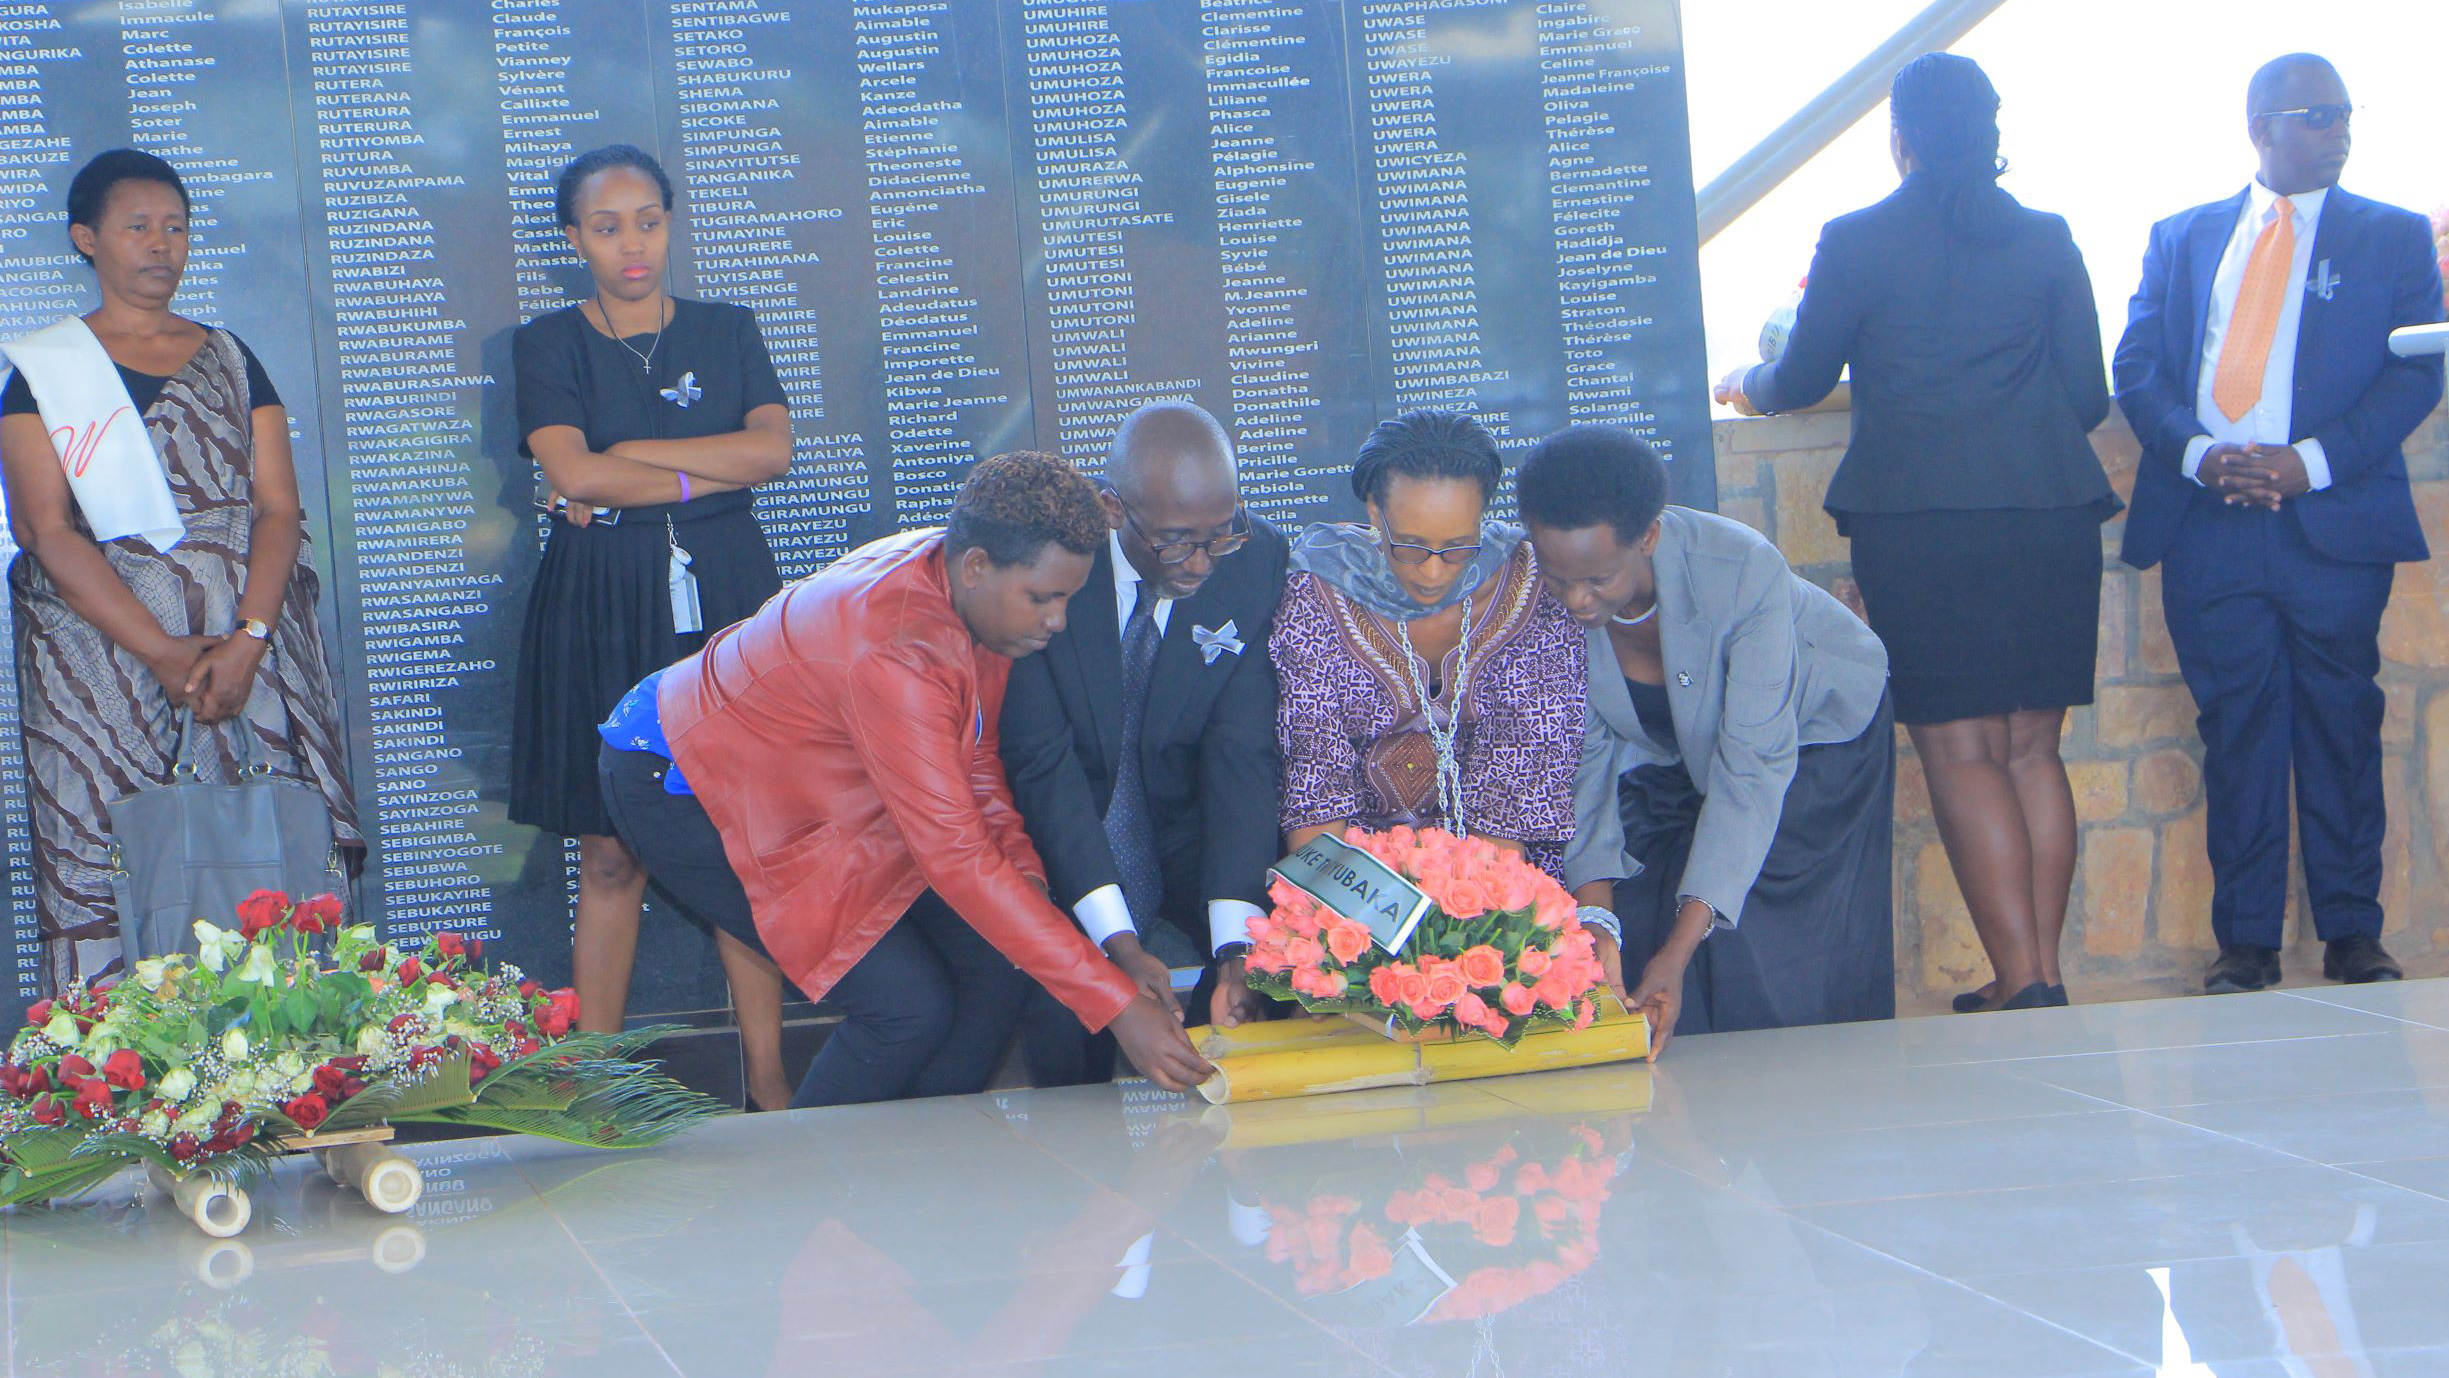 Access Bank Maaging Director Jean Claude Karayenzi  (C) and Valerie Mukabayire of Avega (R) and other officials  honour Tutsi victims laid to rest at Ntarama Genocide Mmeorialu2019s mass grave. Eddie Nsabimana.